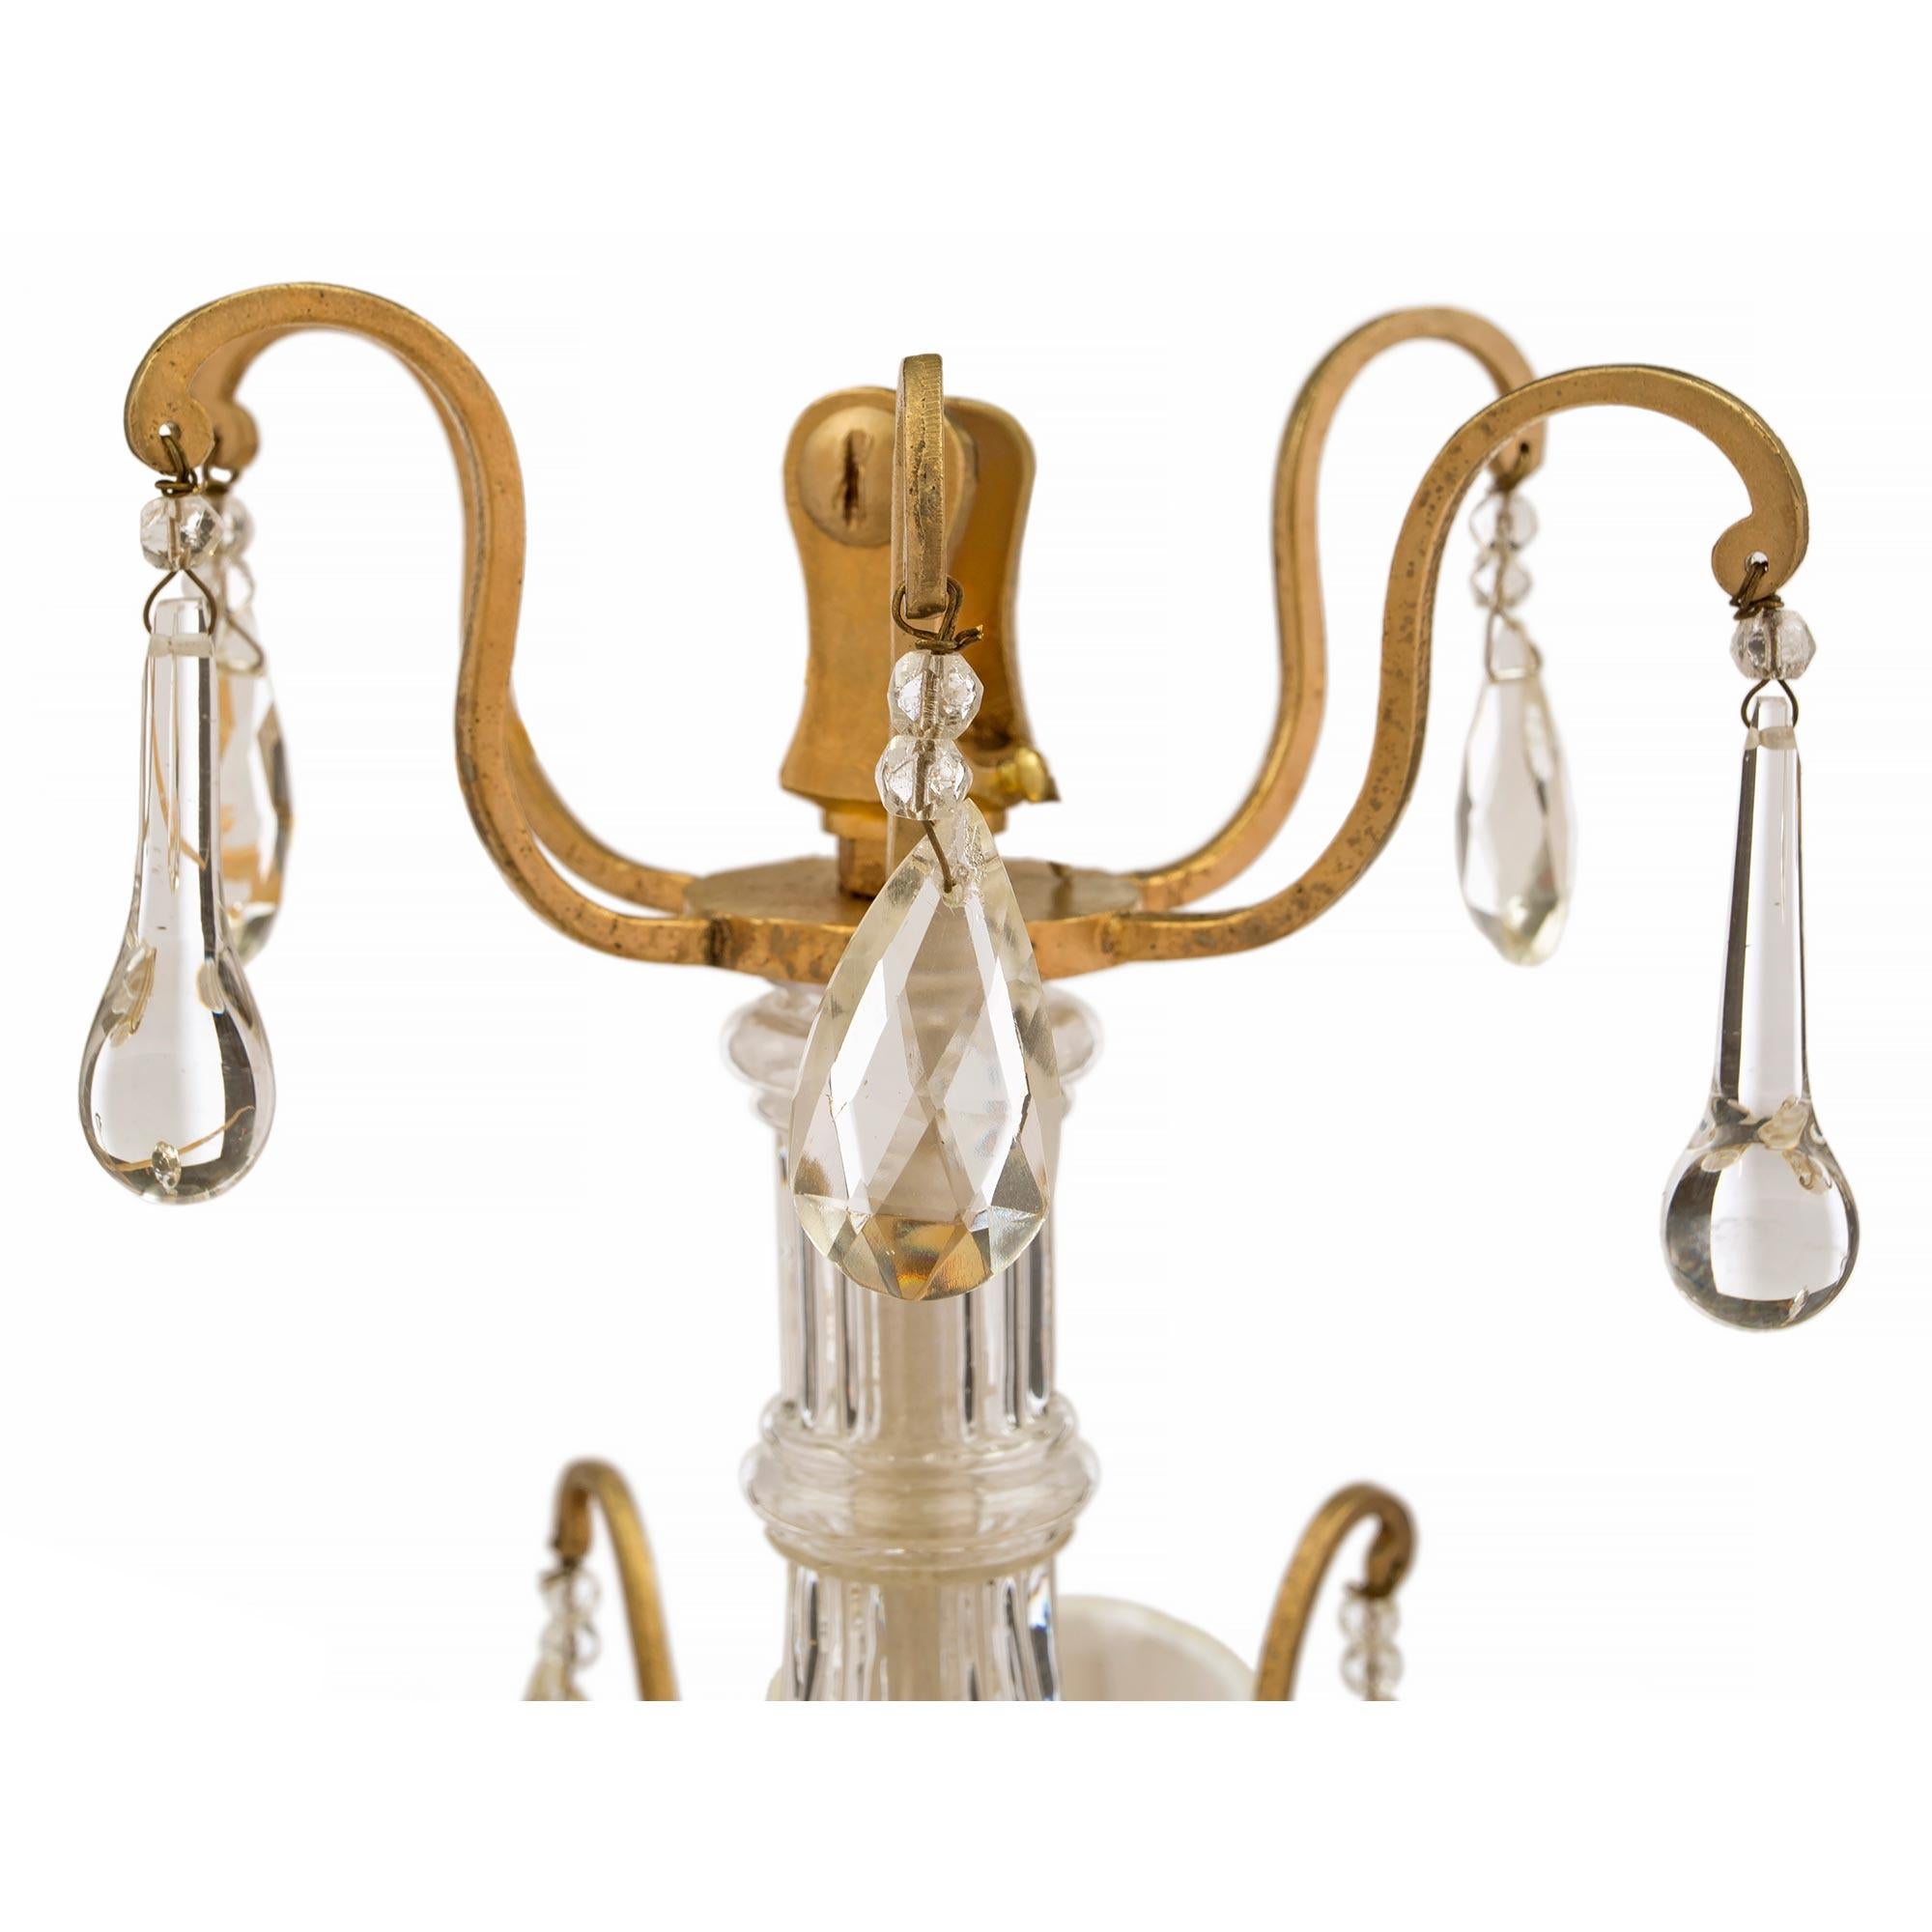 French Mid-19th Century Louis XV Style Baccarat Crystal and Ormolu Chandelier In Good Condition For Sale In West Palm Beach, FL